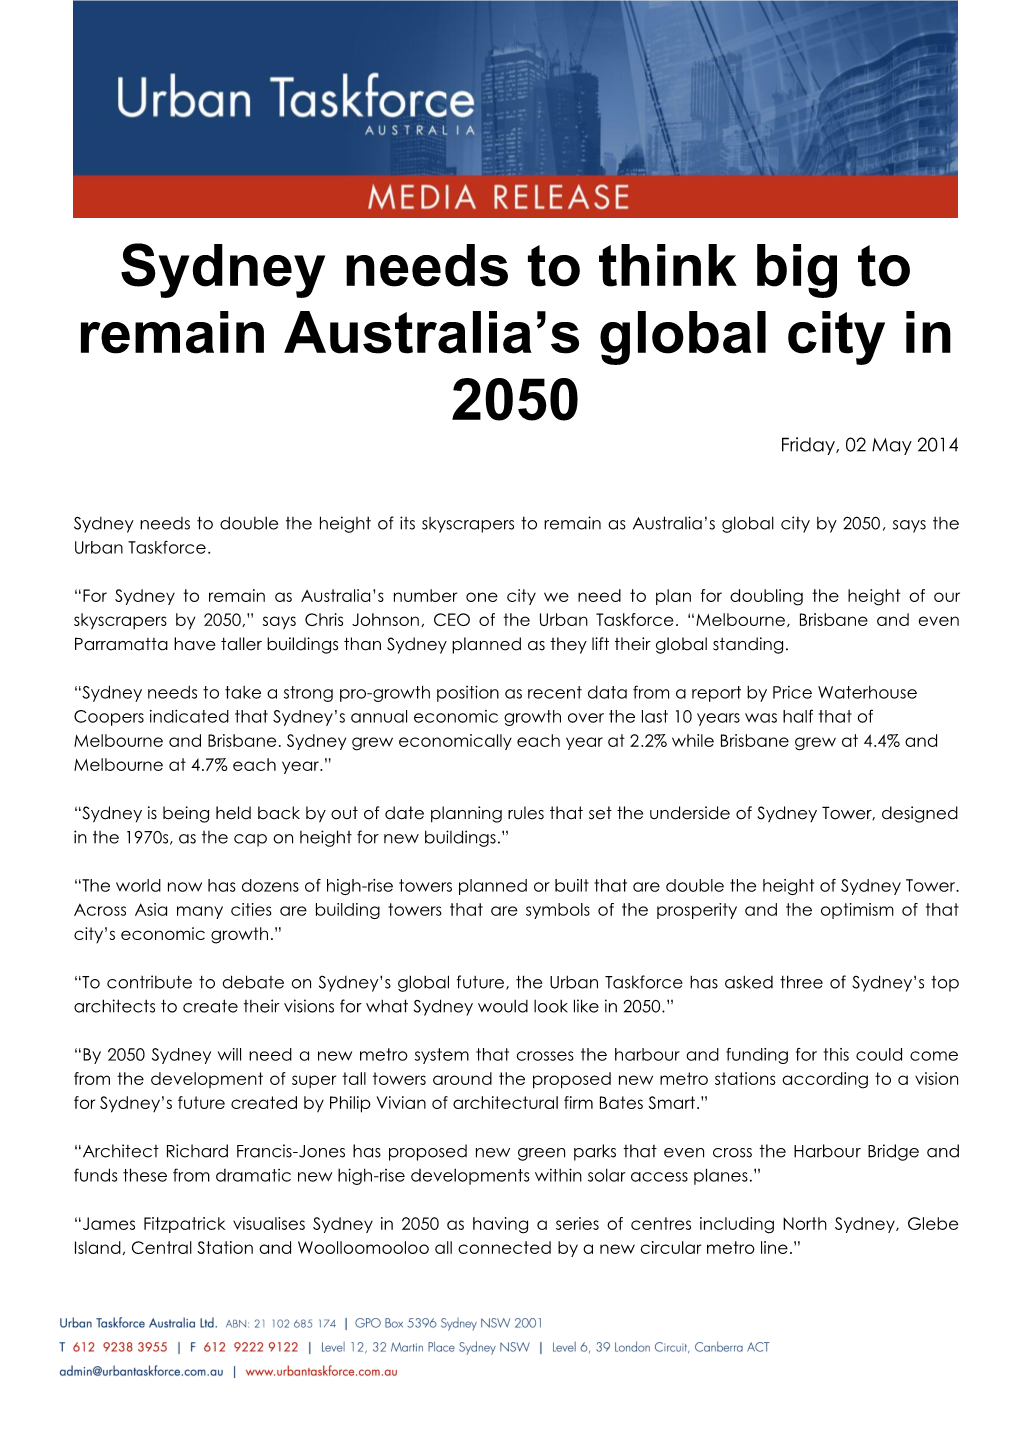 Sydney Needs to Think Big to Remain Australia's Global City in 2050